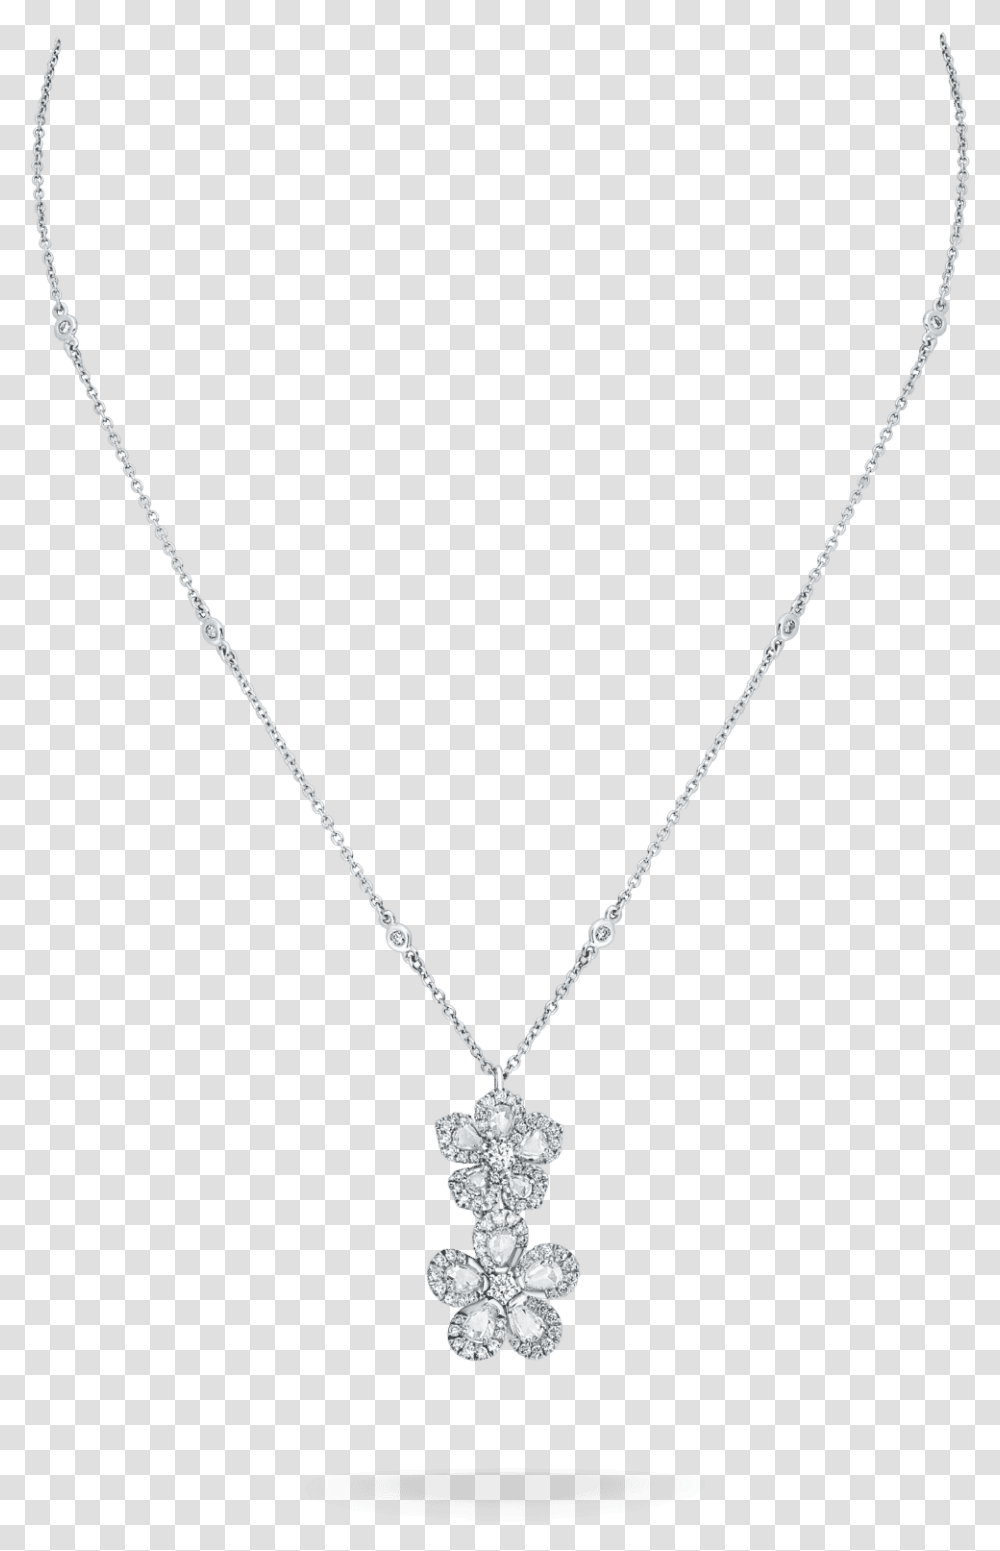 Ms 10 008 01 F1 Miss Daisy Necklace Pendant, Jewelry, Accessories, Accessory, Diamond Transparent Png